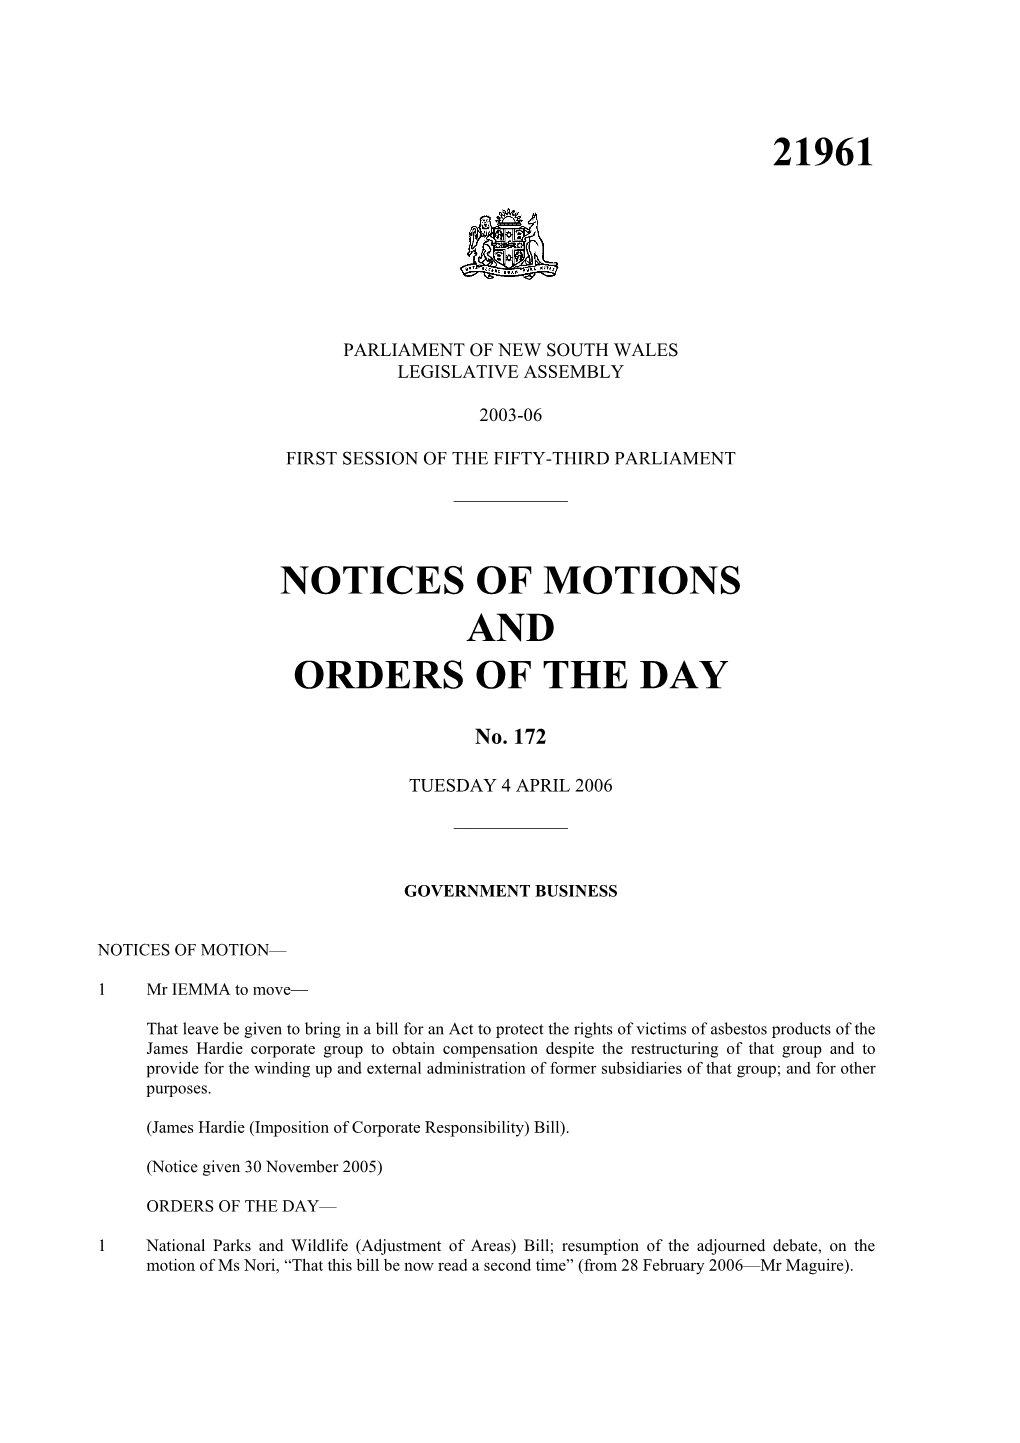 21961 Notices of Motions and Orders of The